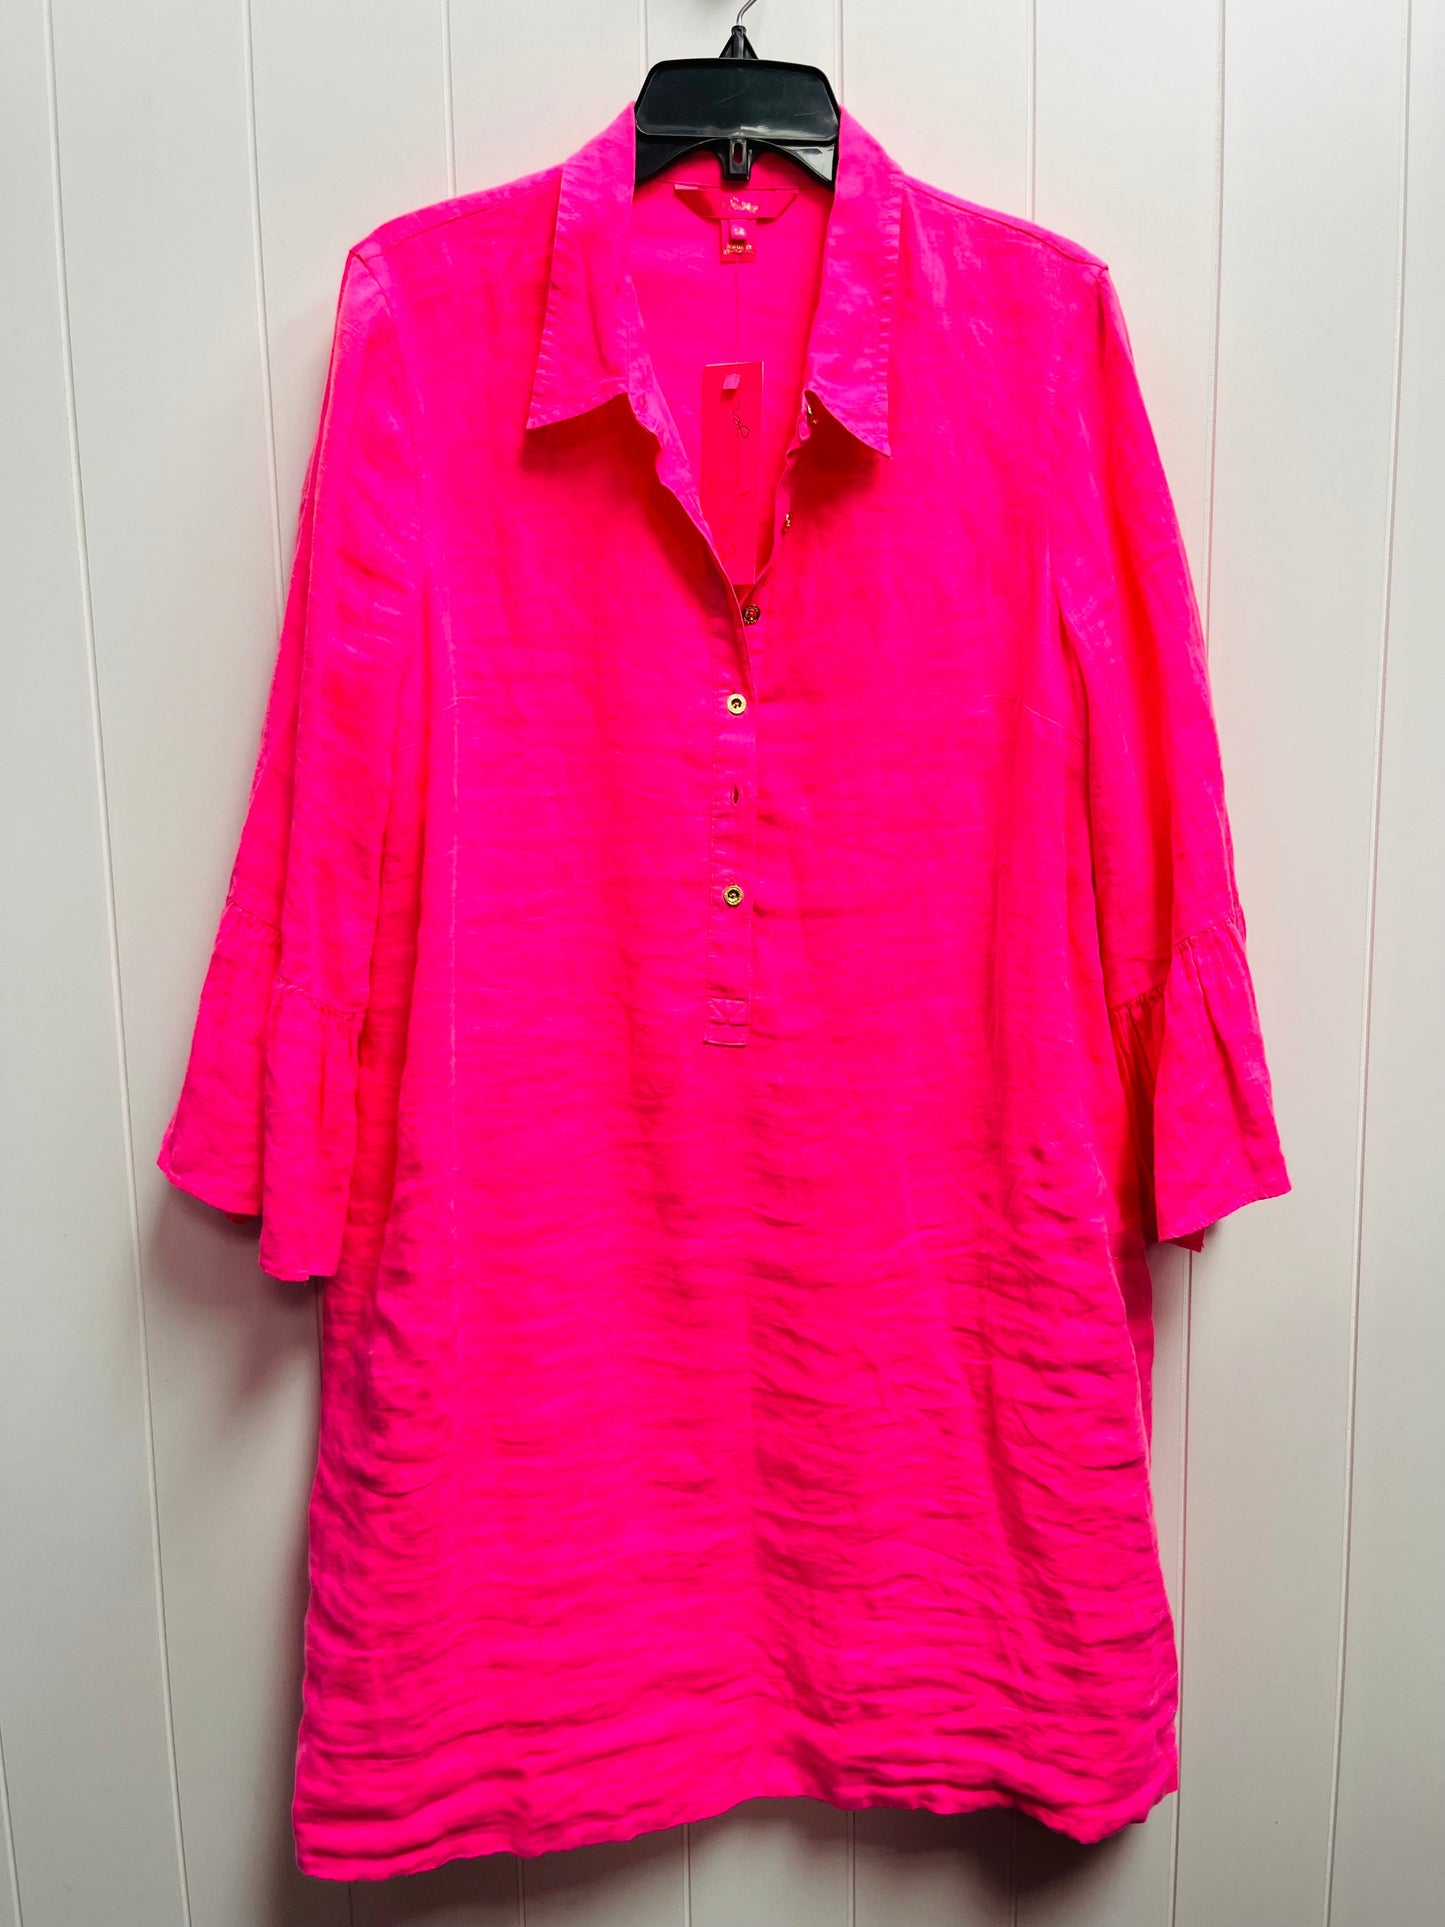 Pink Dress Casual Short Lilly Pulitzer, Size 14